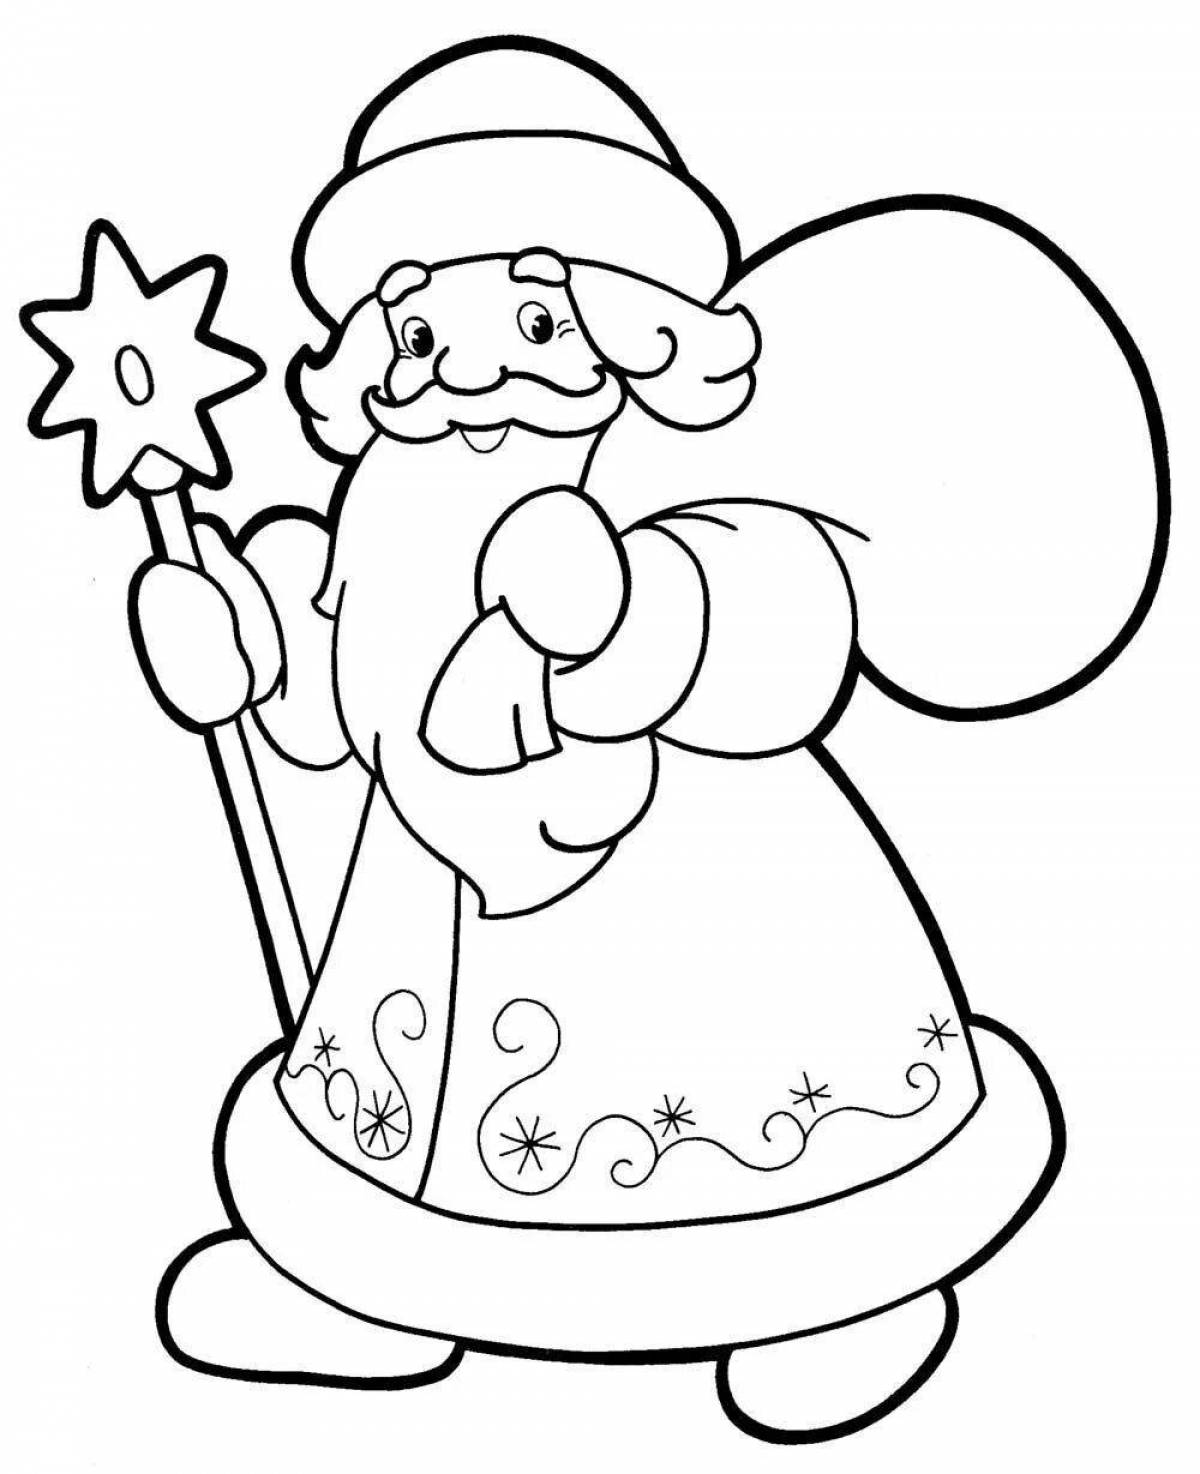 Coloring page nice santa claus with bag